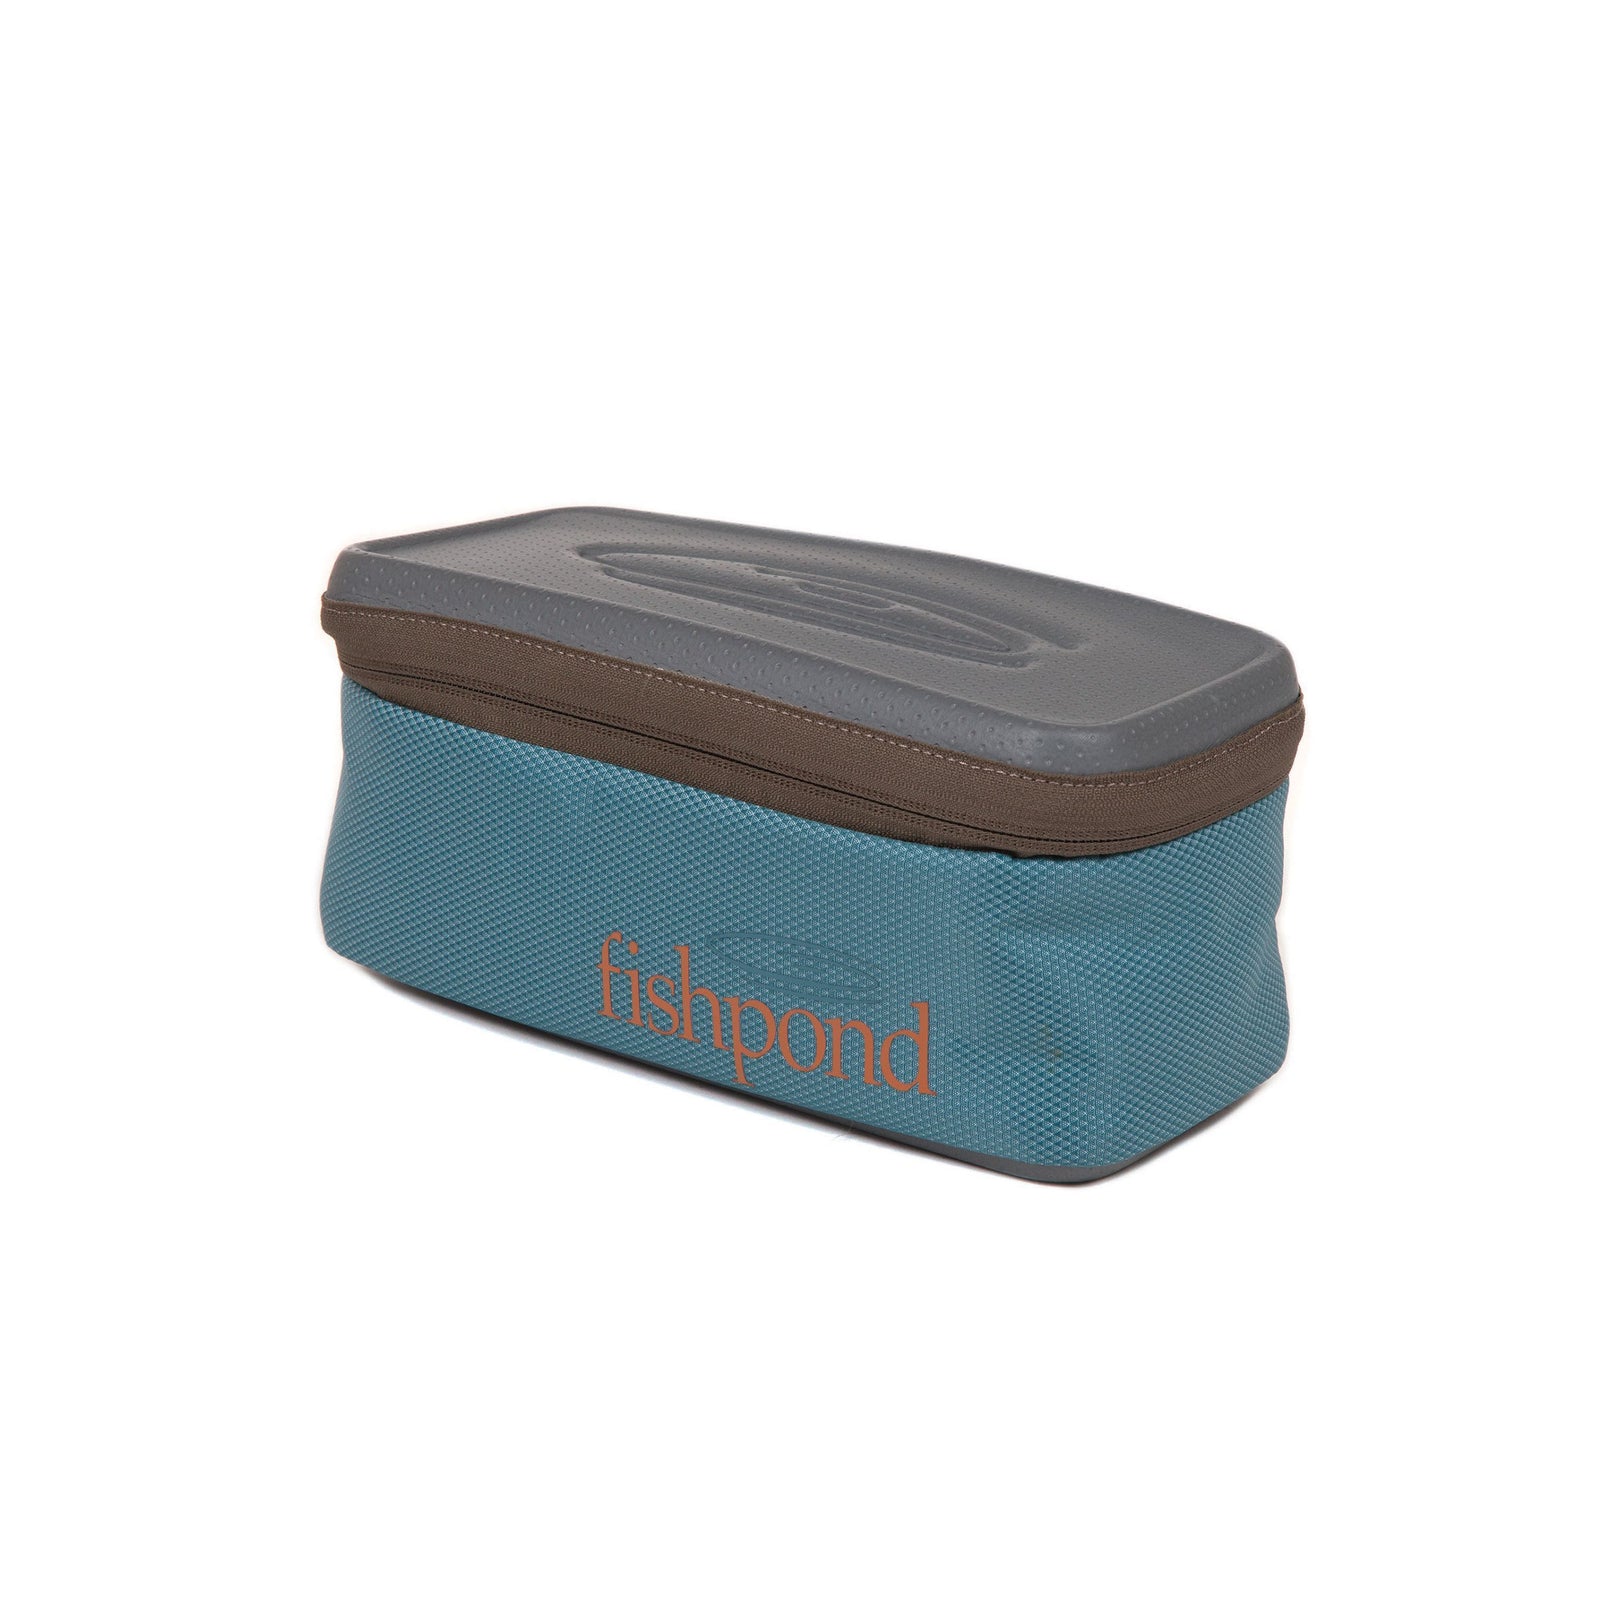 Fly Fishing Reel Cases - basin + bend